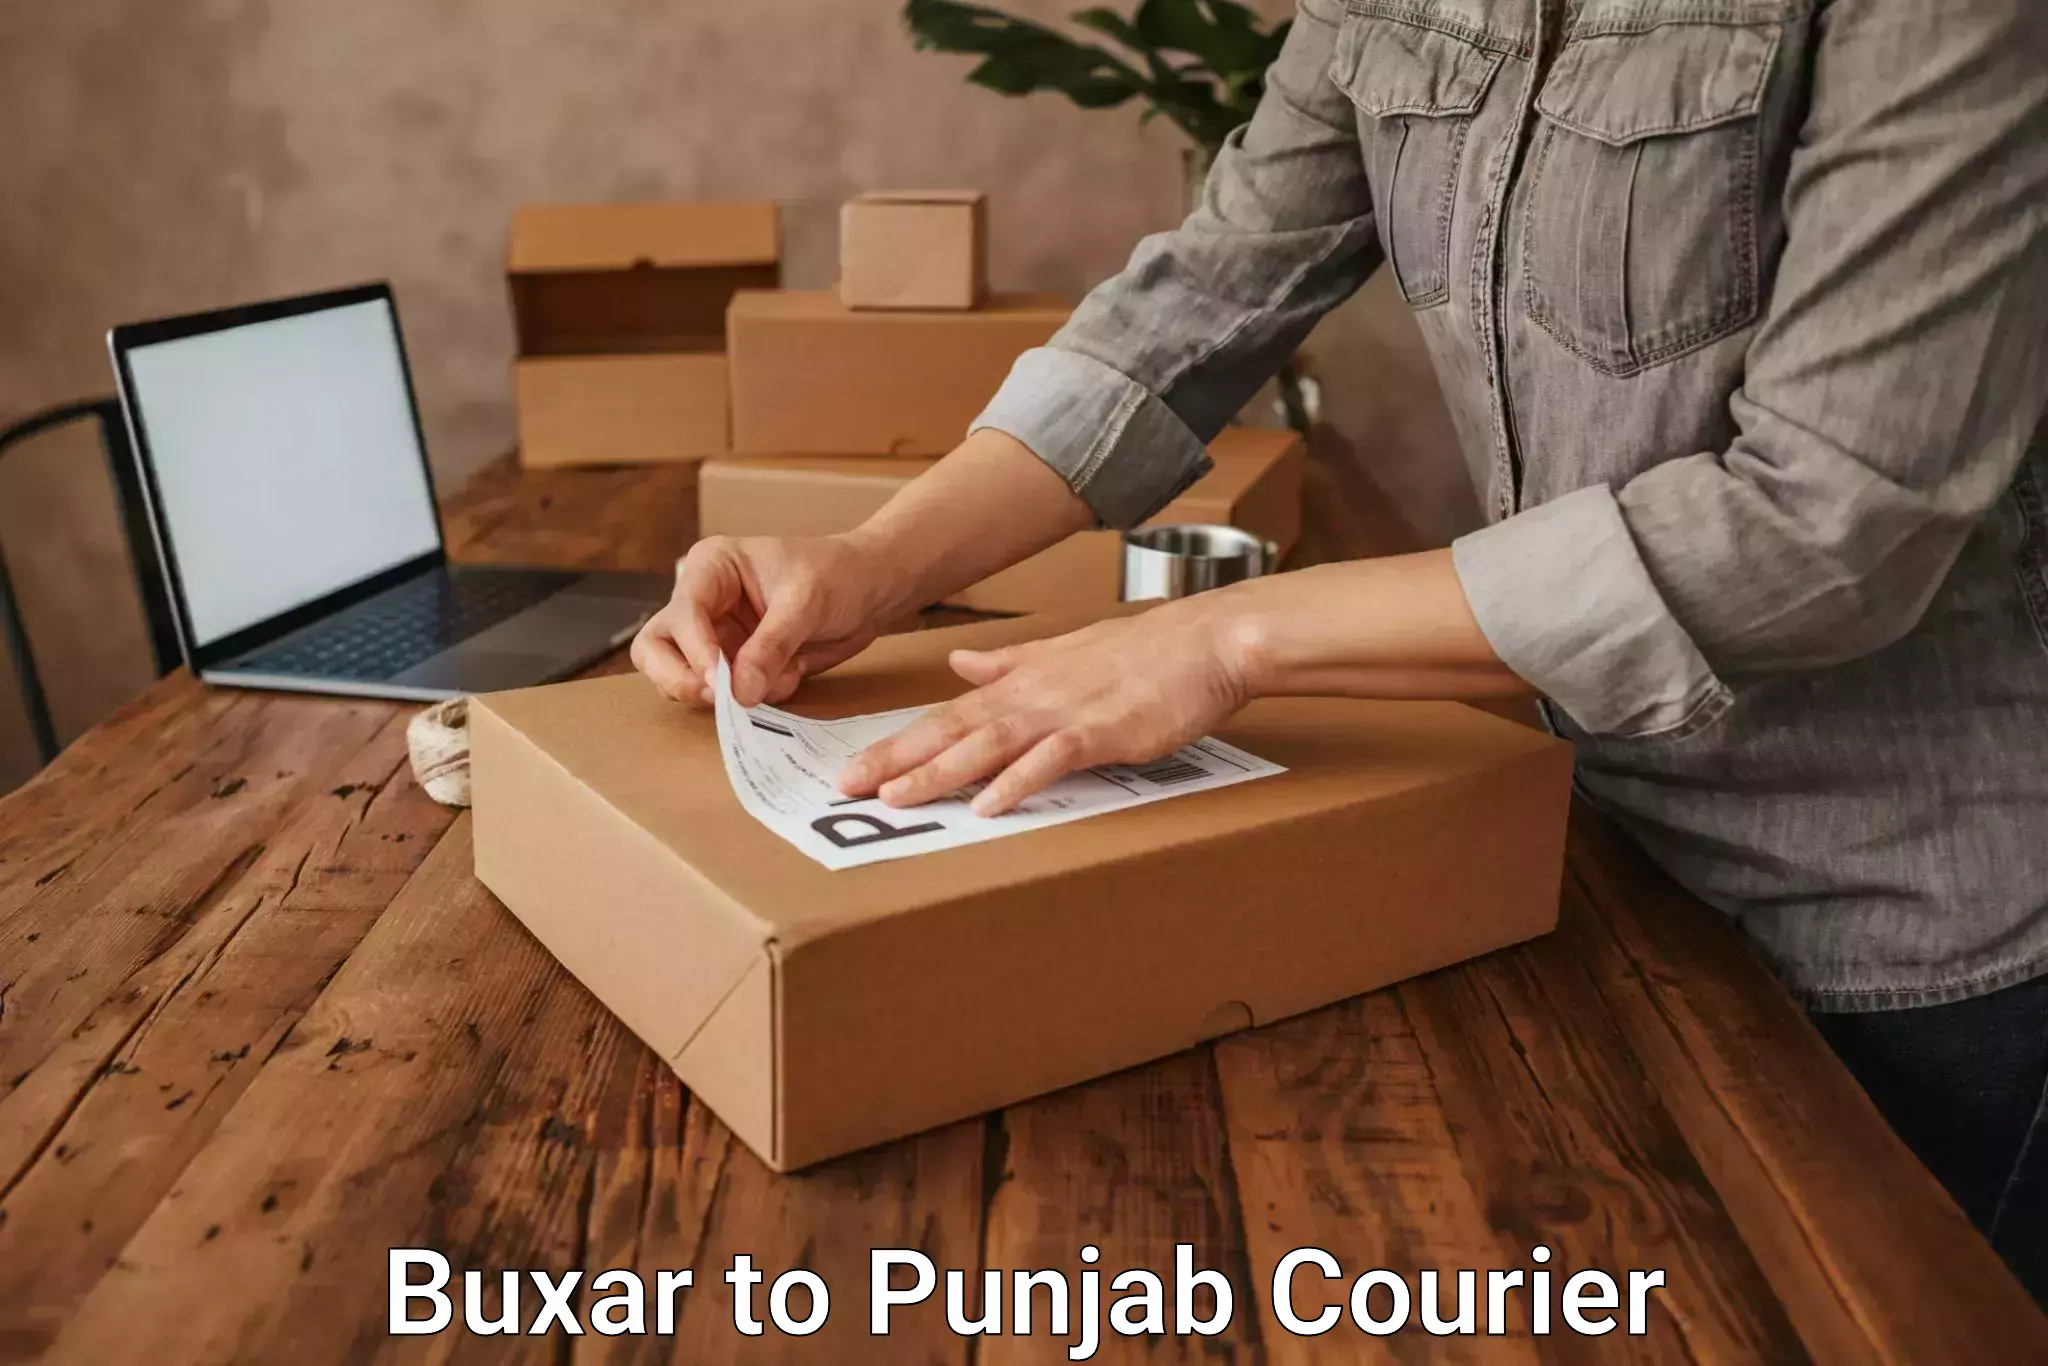 Household goods delivery in Buxar to Mohali